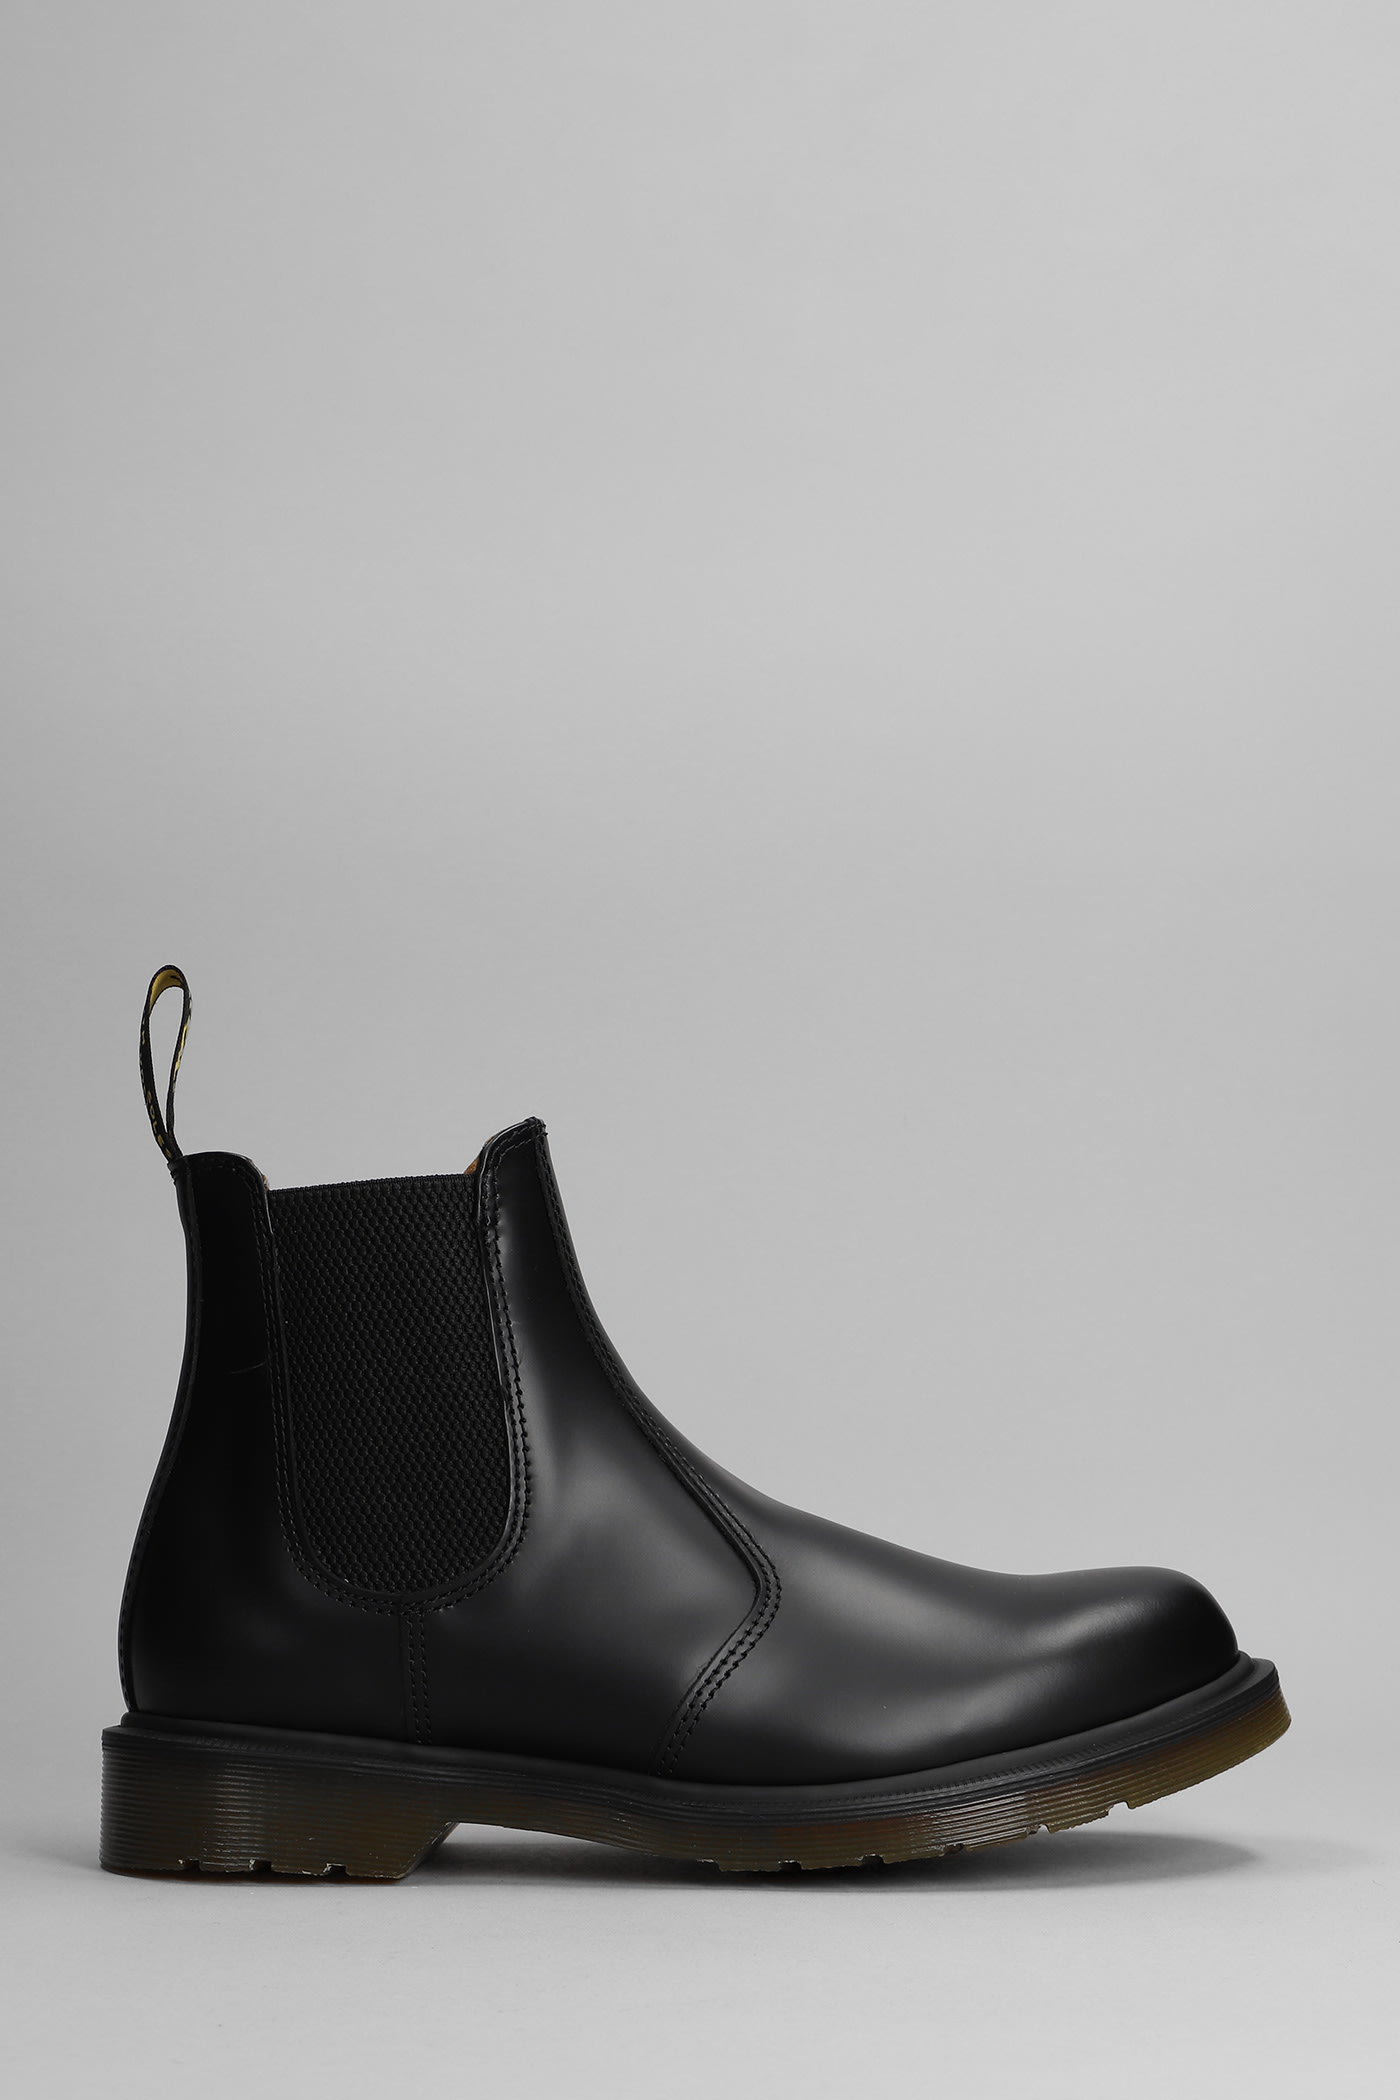 Dr. Martens 2976 Low Heels Ankle Boots In Black Leather